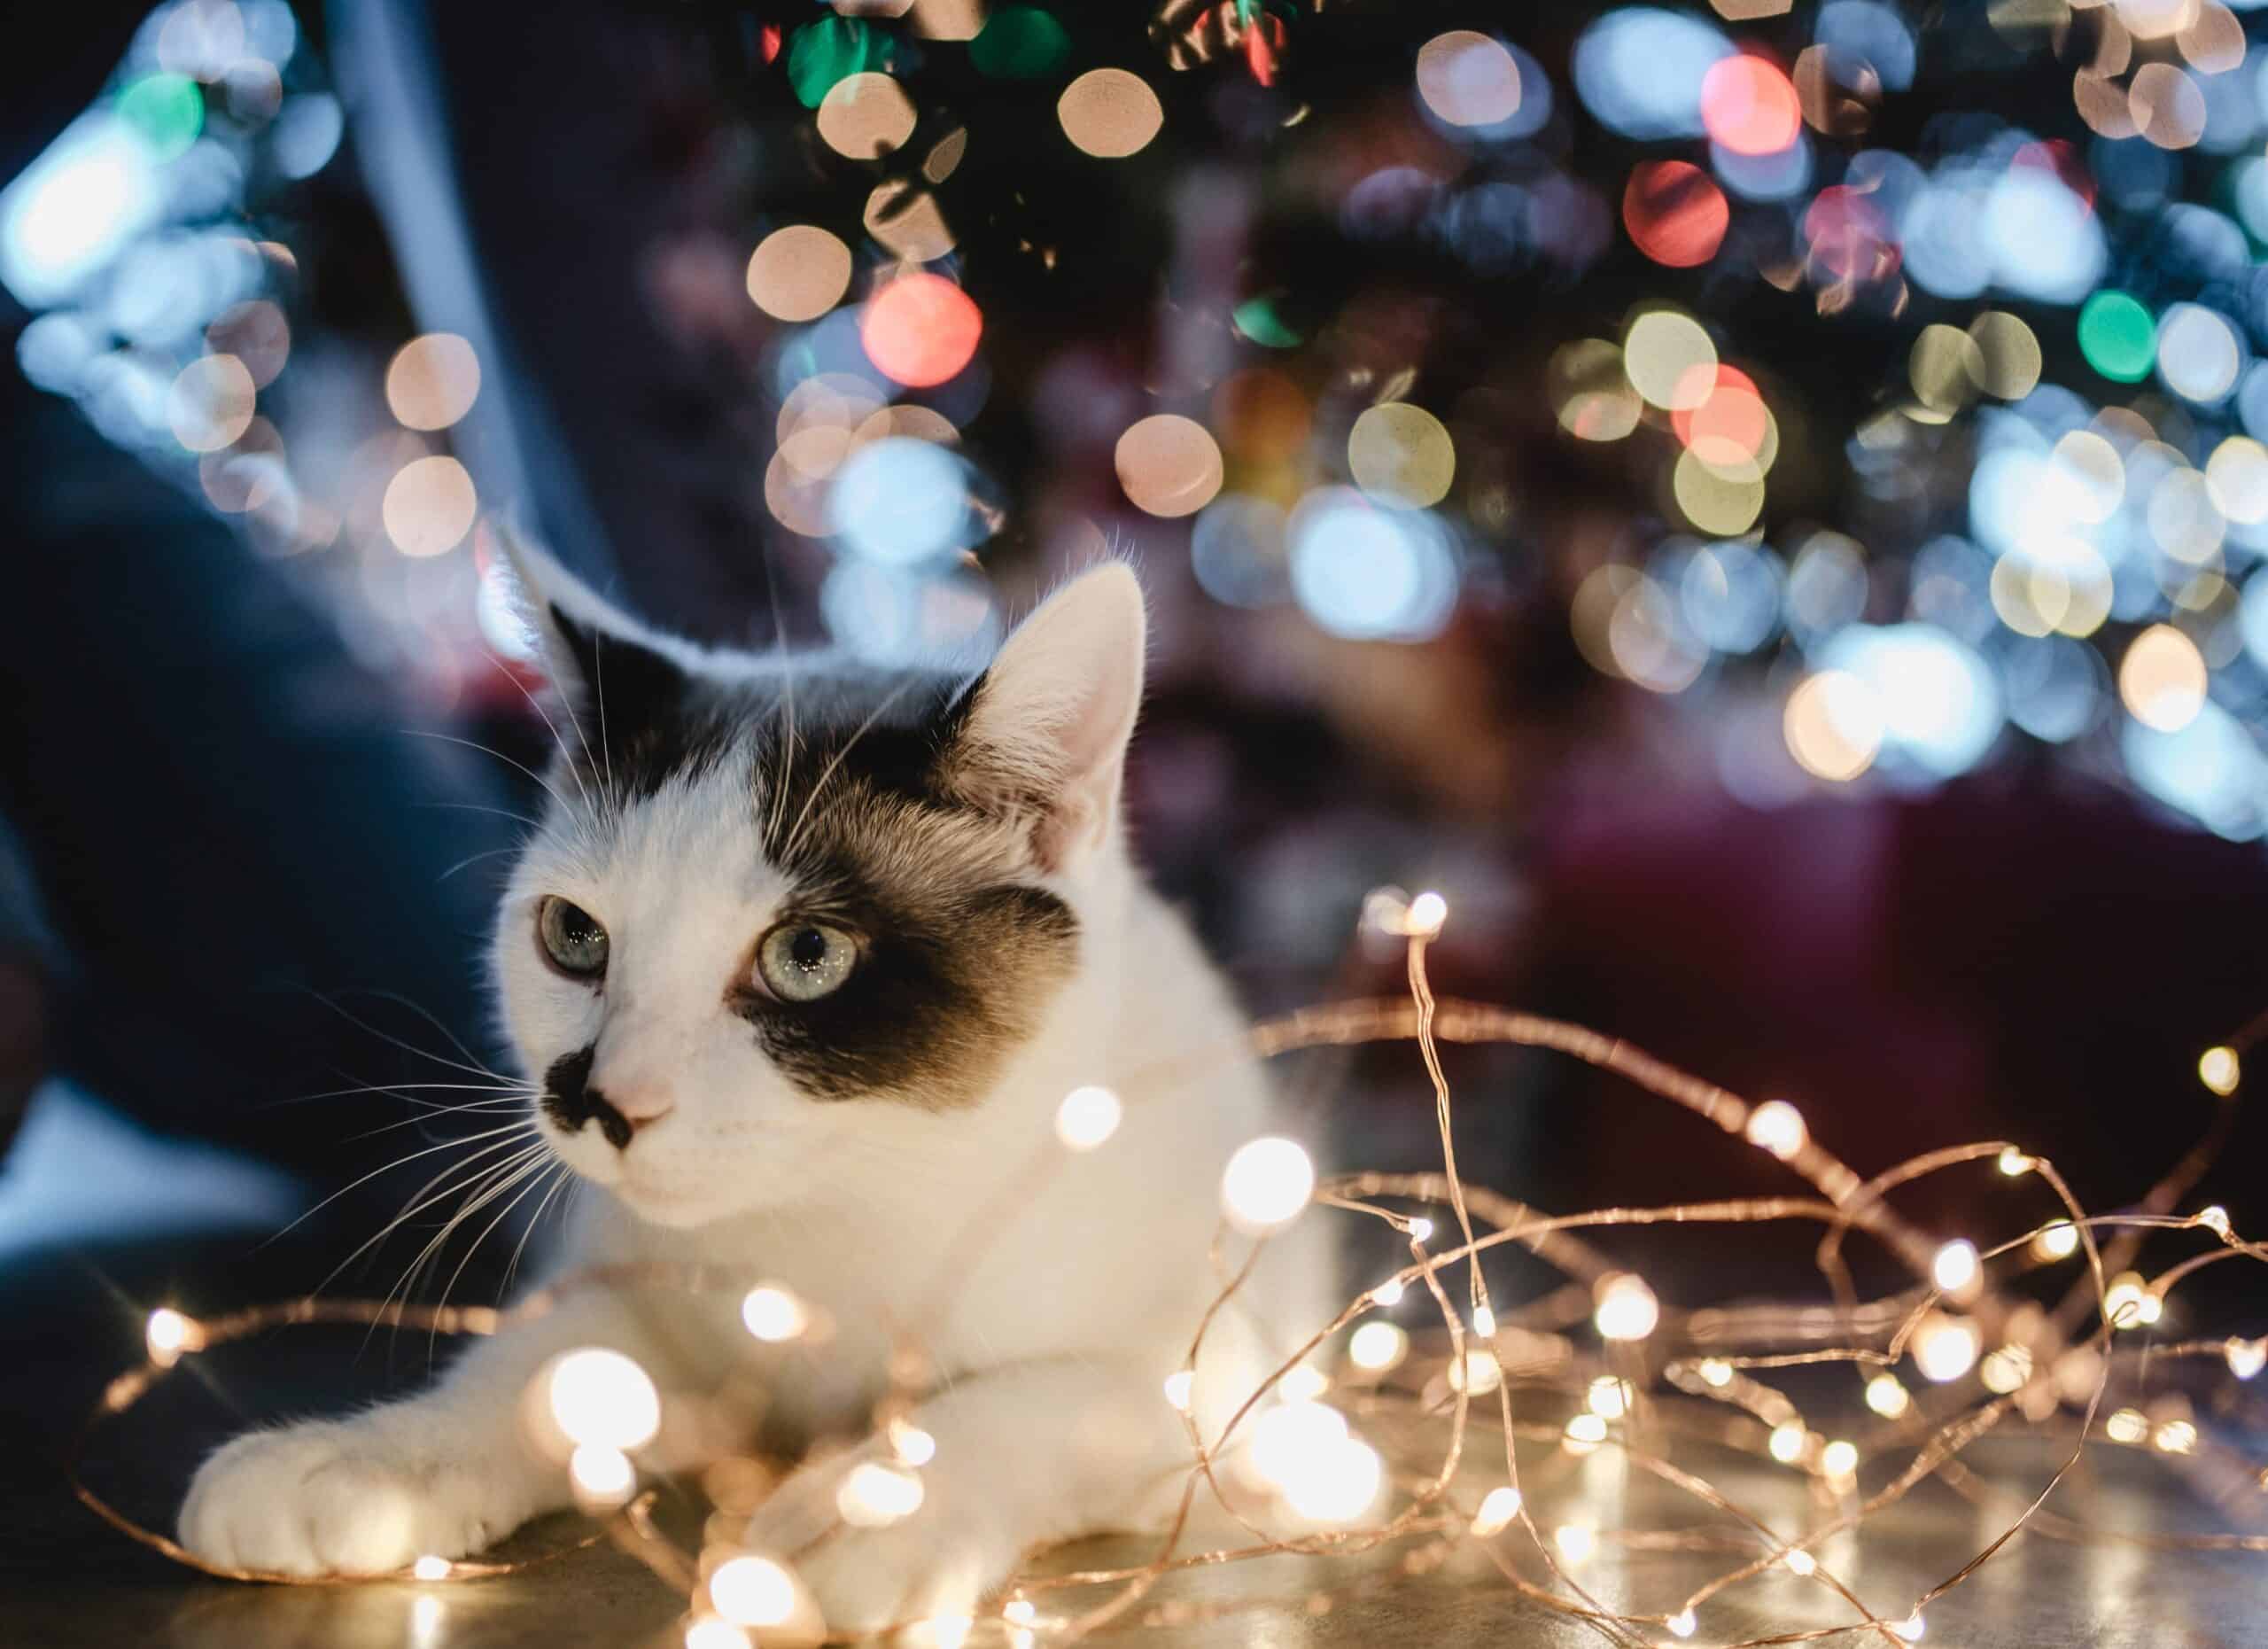 How to Keep Your Pet Safe During the Holidays